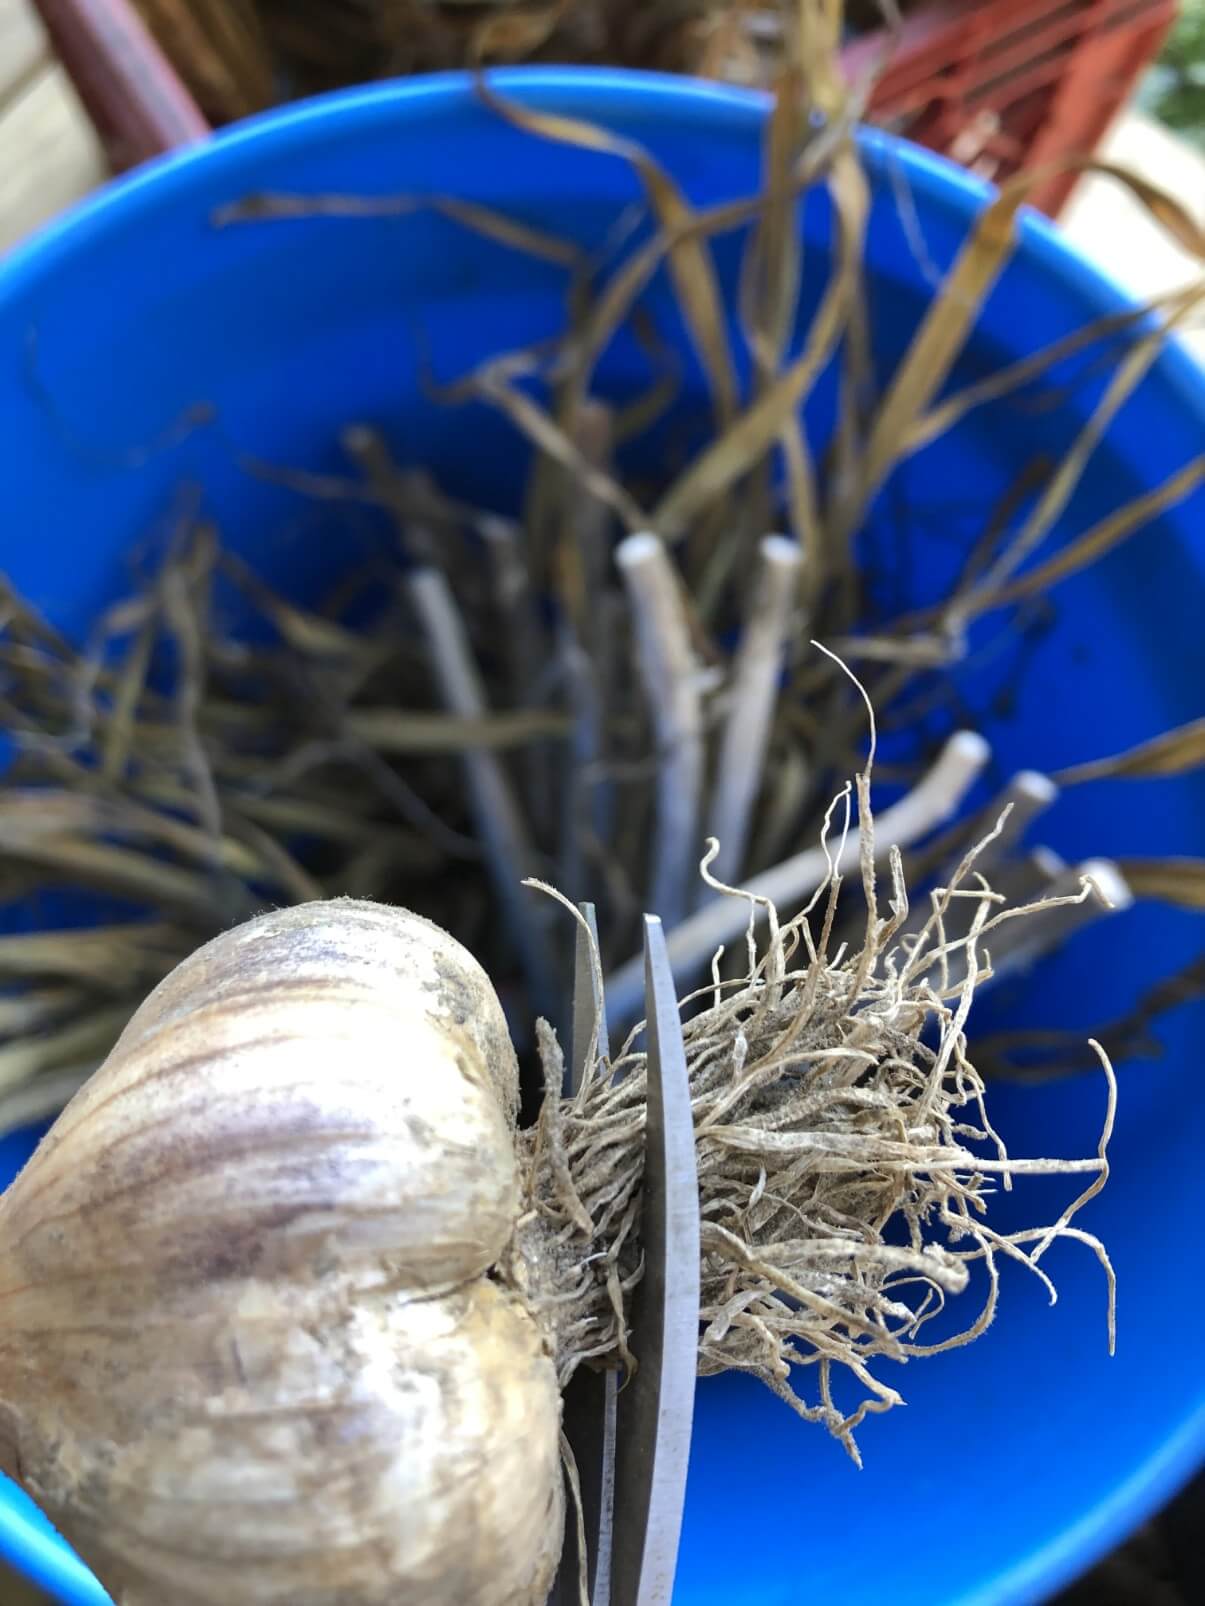 nippers trimming dirty roots from head of garlic